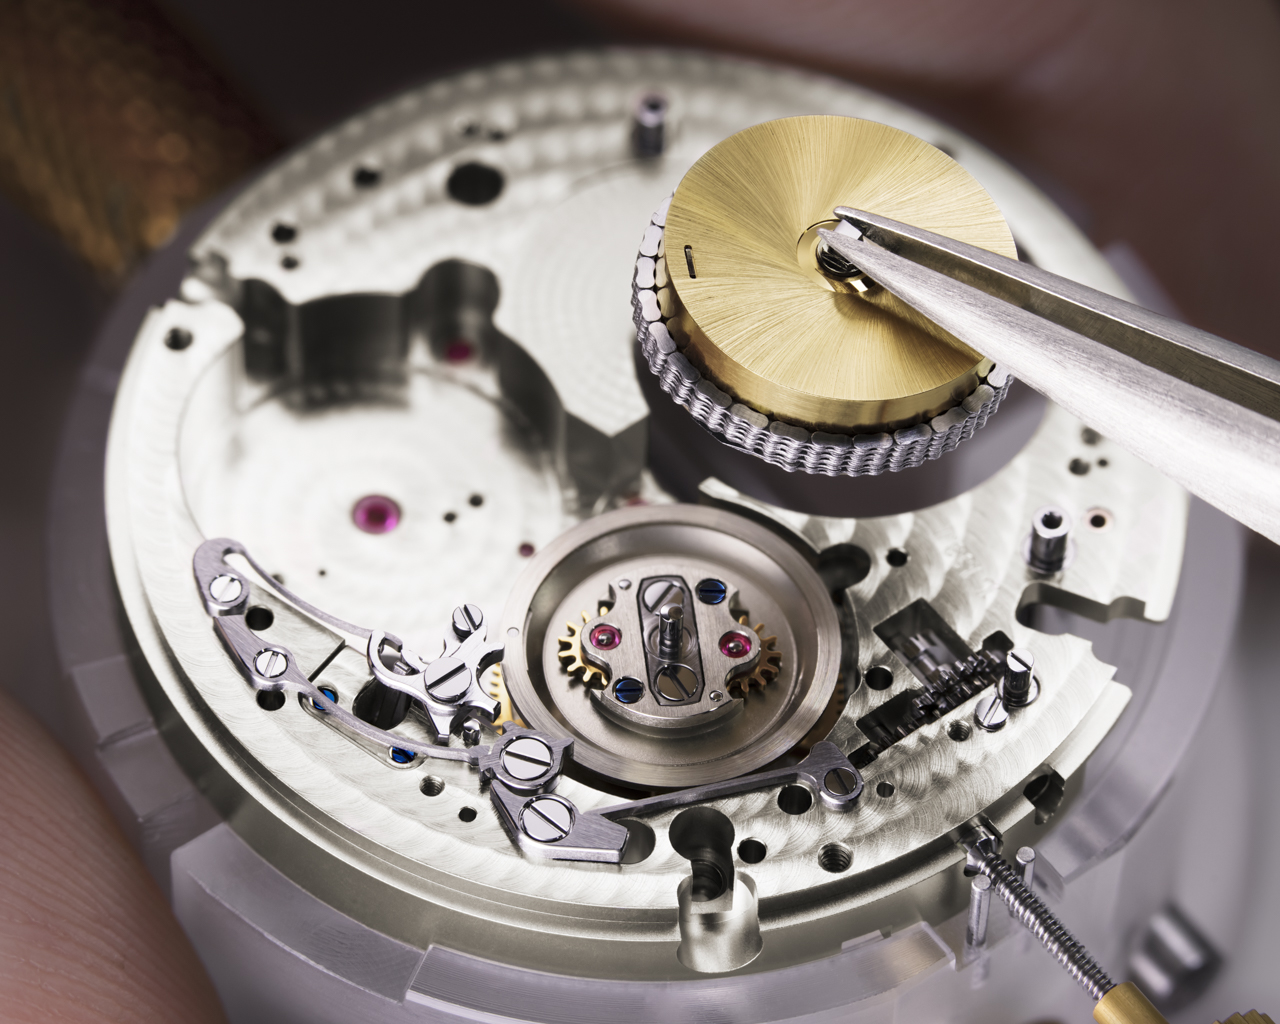 Once the watchmaker has wrapped the delicate chain around the previously assembled mainspring barrel, they can integrate both components into the basic movement. The chain is then attached to the fusée. The planetary gearing or differential must be mounted first.